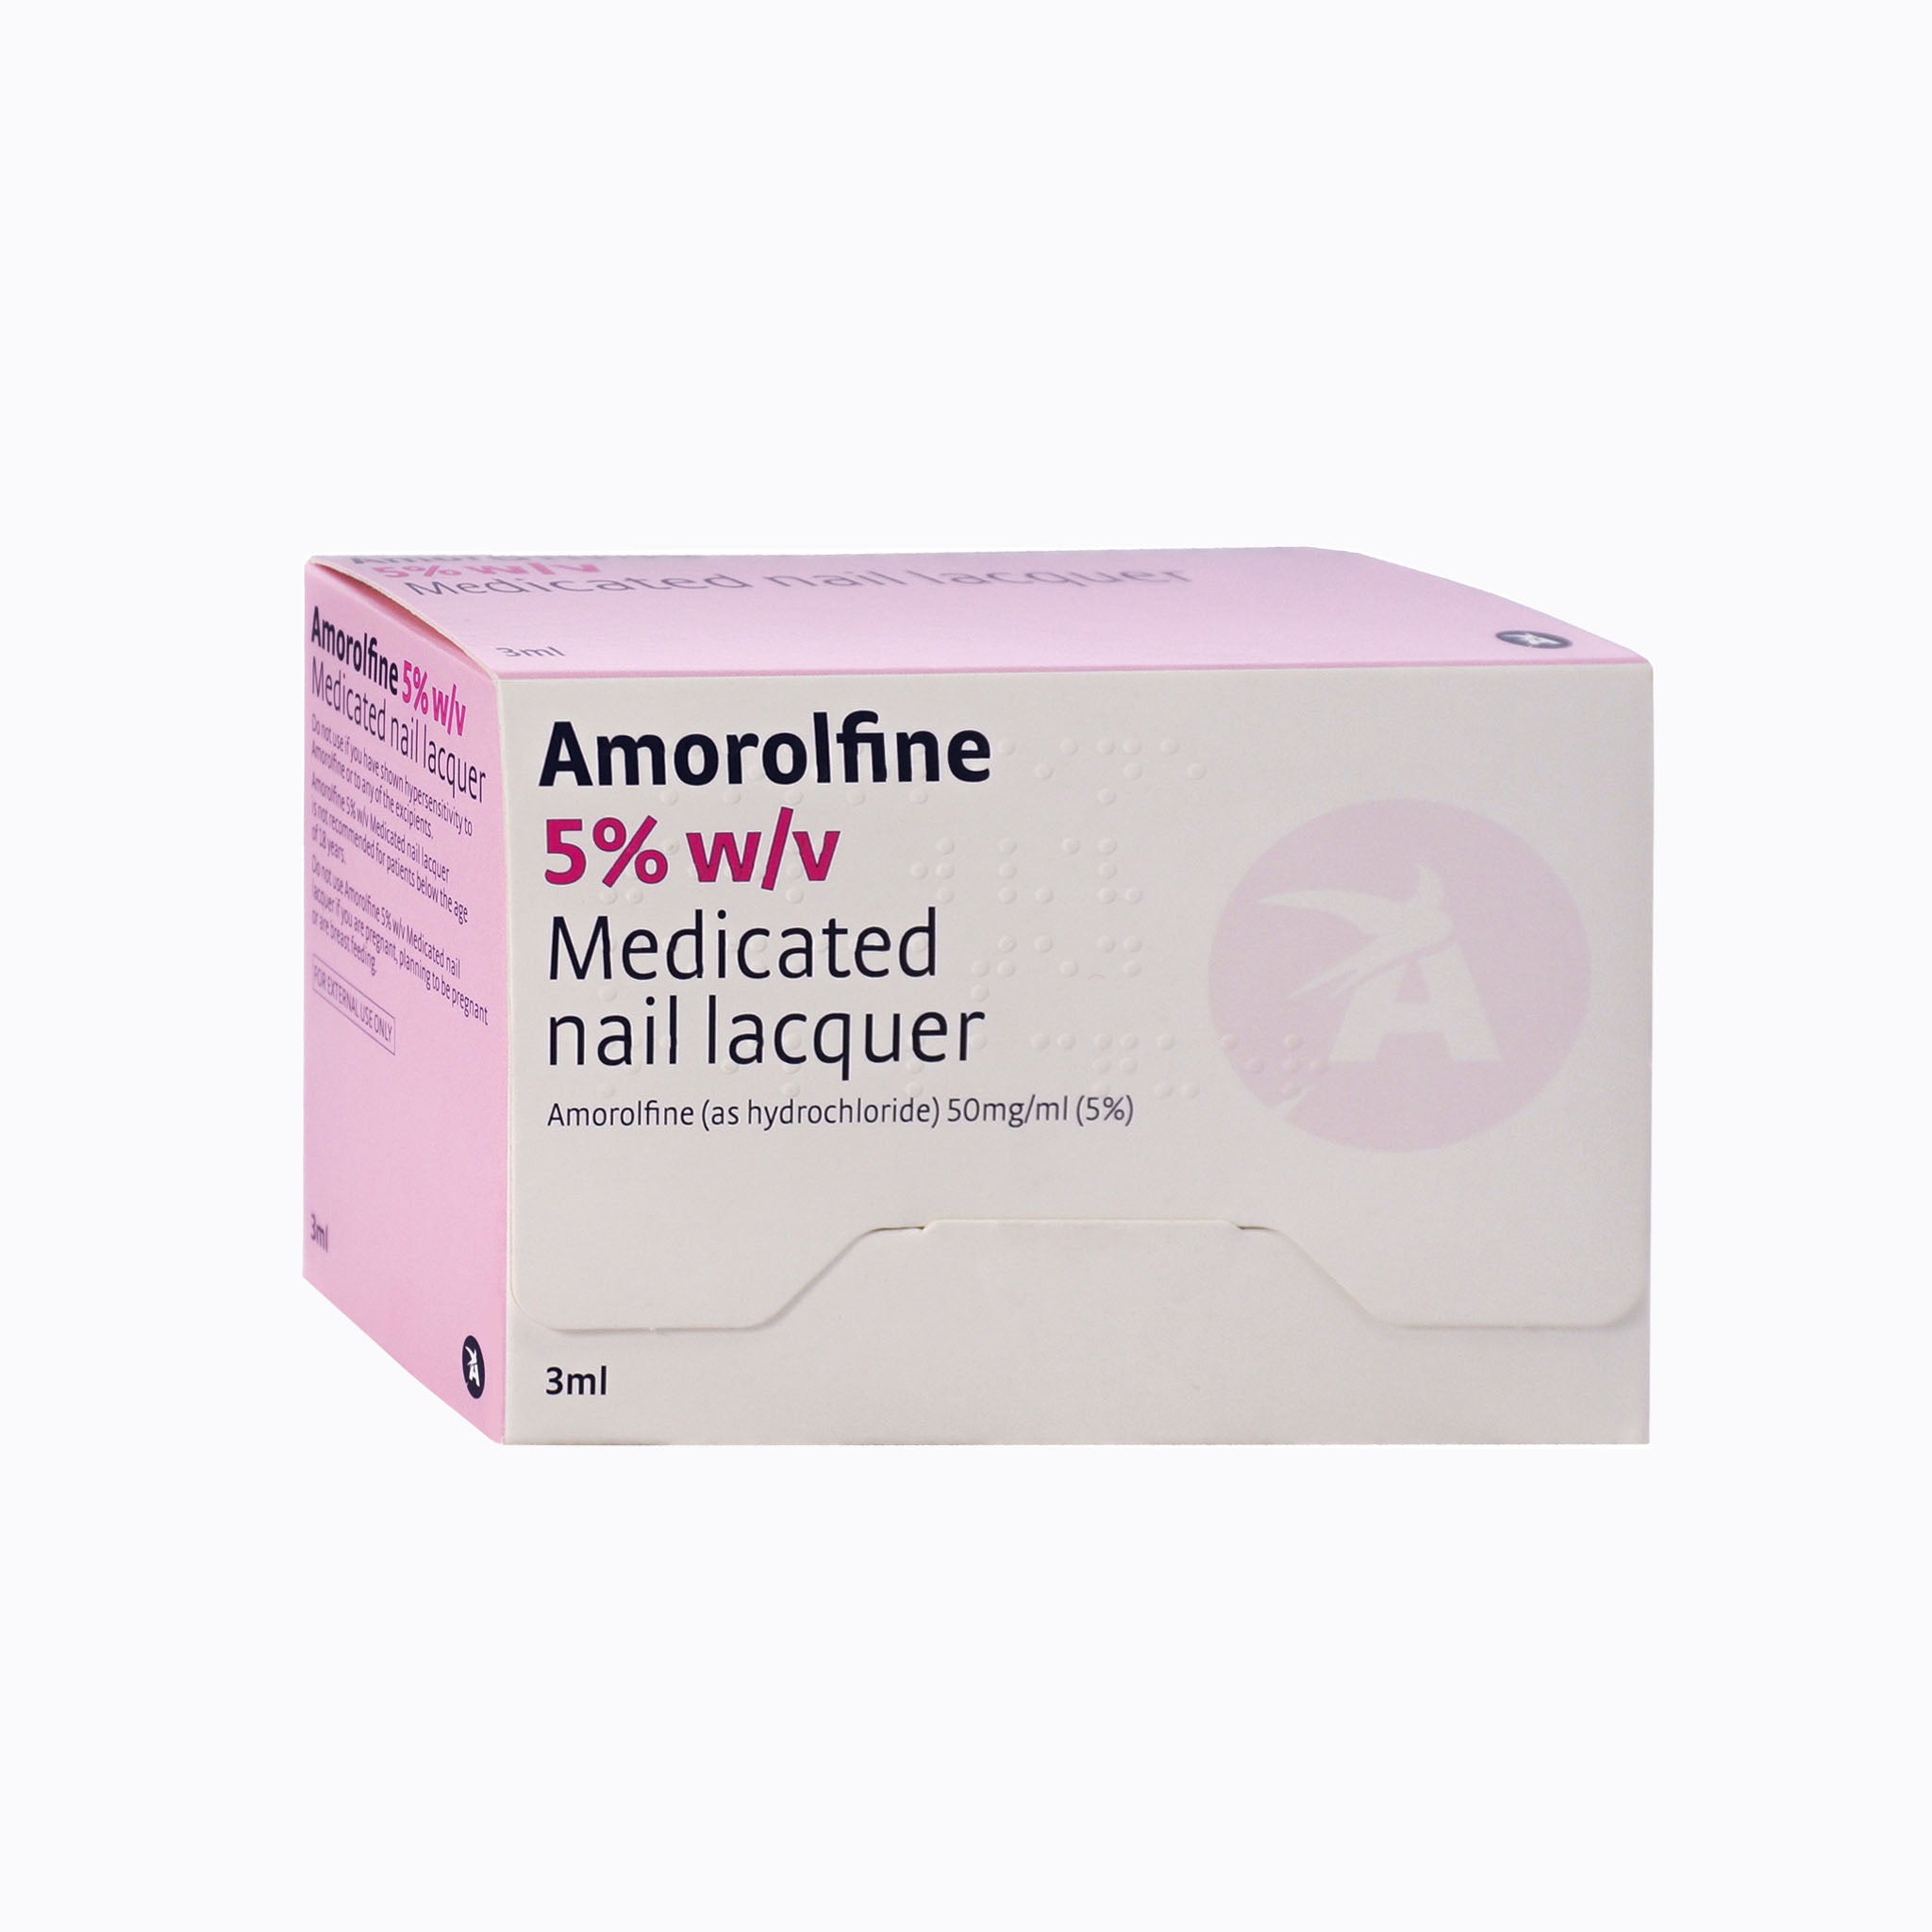 Amorolfine 5% Medicated Nail Fungal Lacquer 3ml